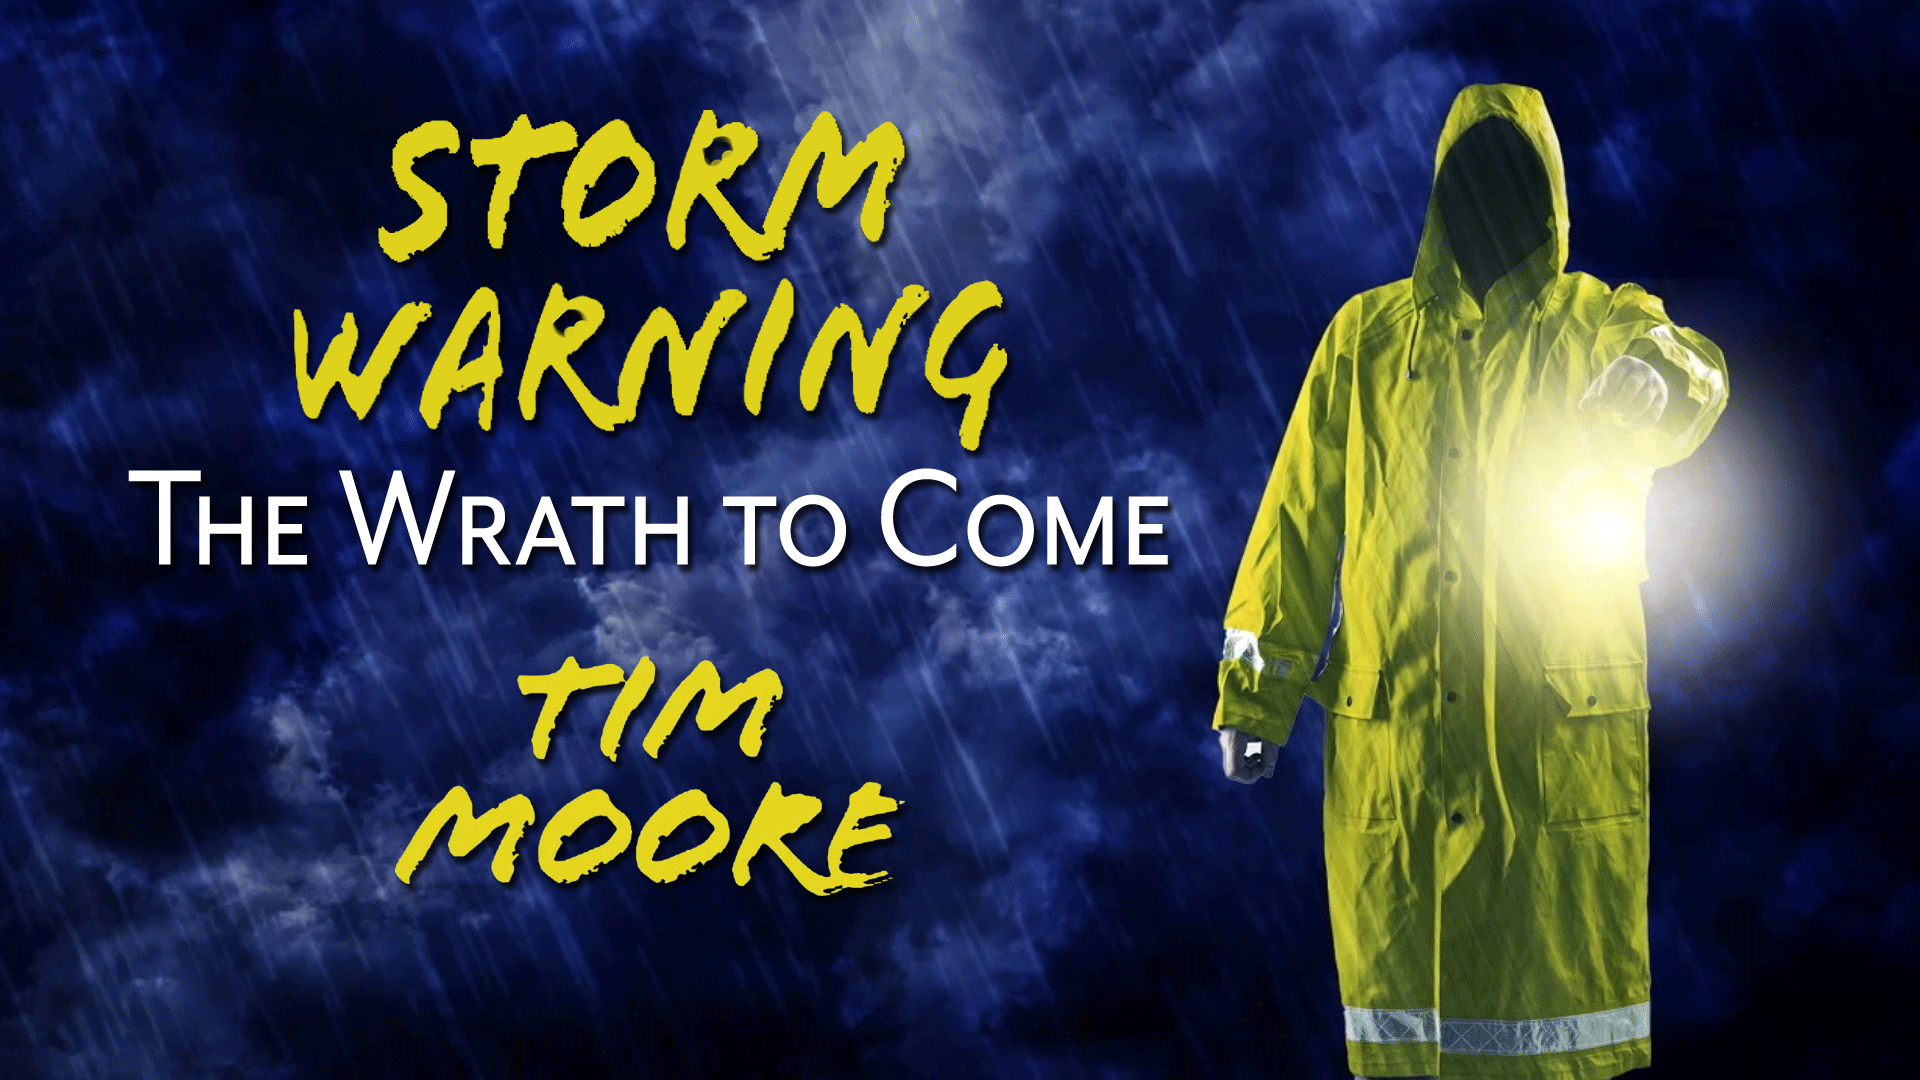 Storm Warning: The Wrath to Come